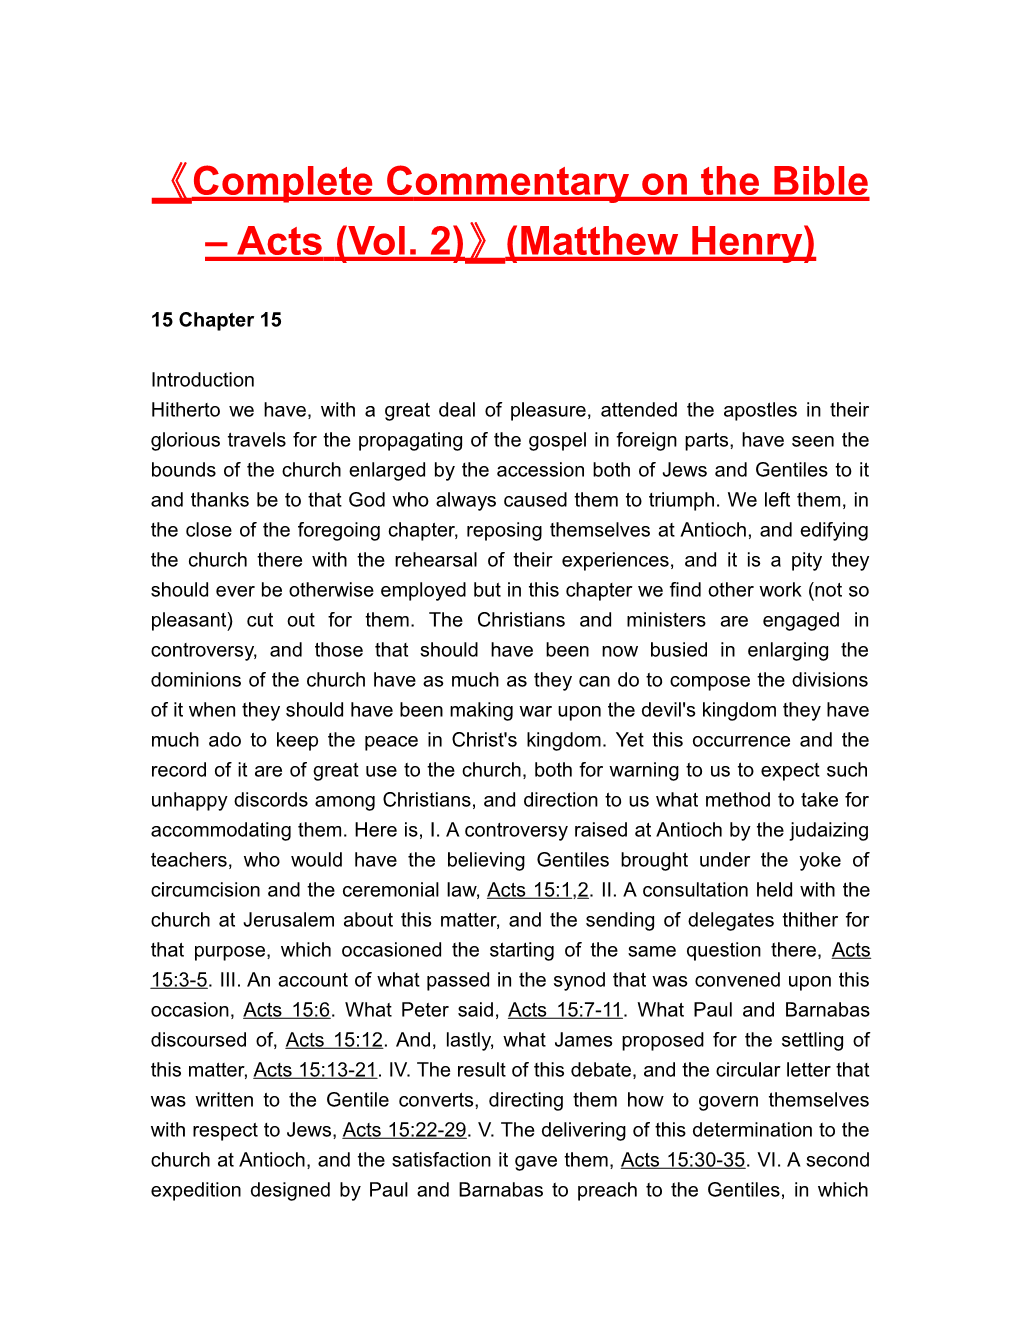 Complete Commentary on the Bible Acts(Vol. 2) (Matthew Henry)